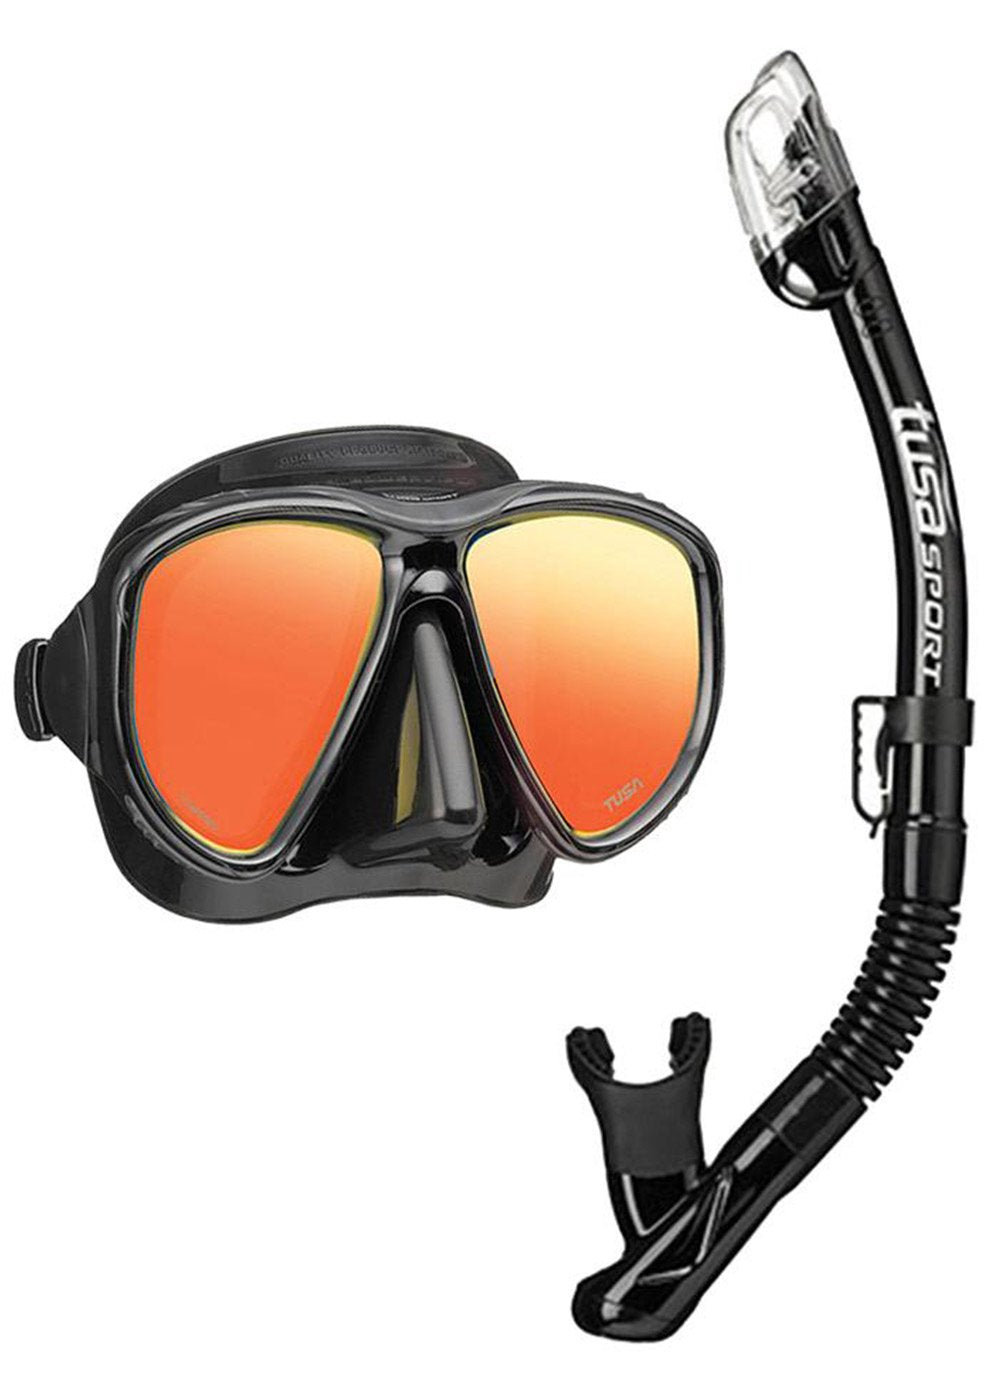 Tusa Black Series Mirror Mask Snorkel Pack with Bag - Adreno - Ocean  Outfitters